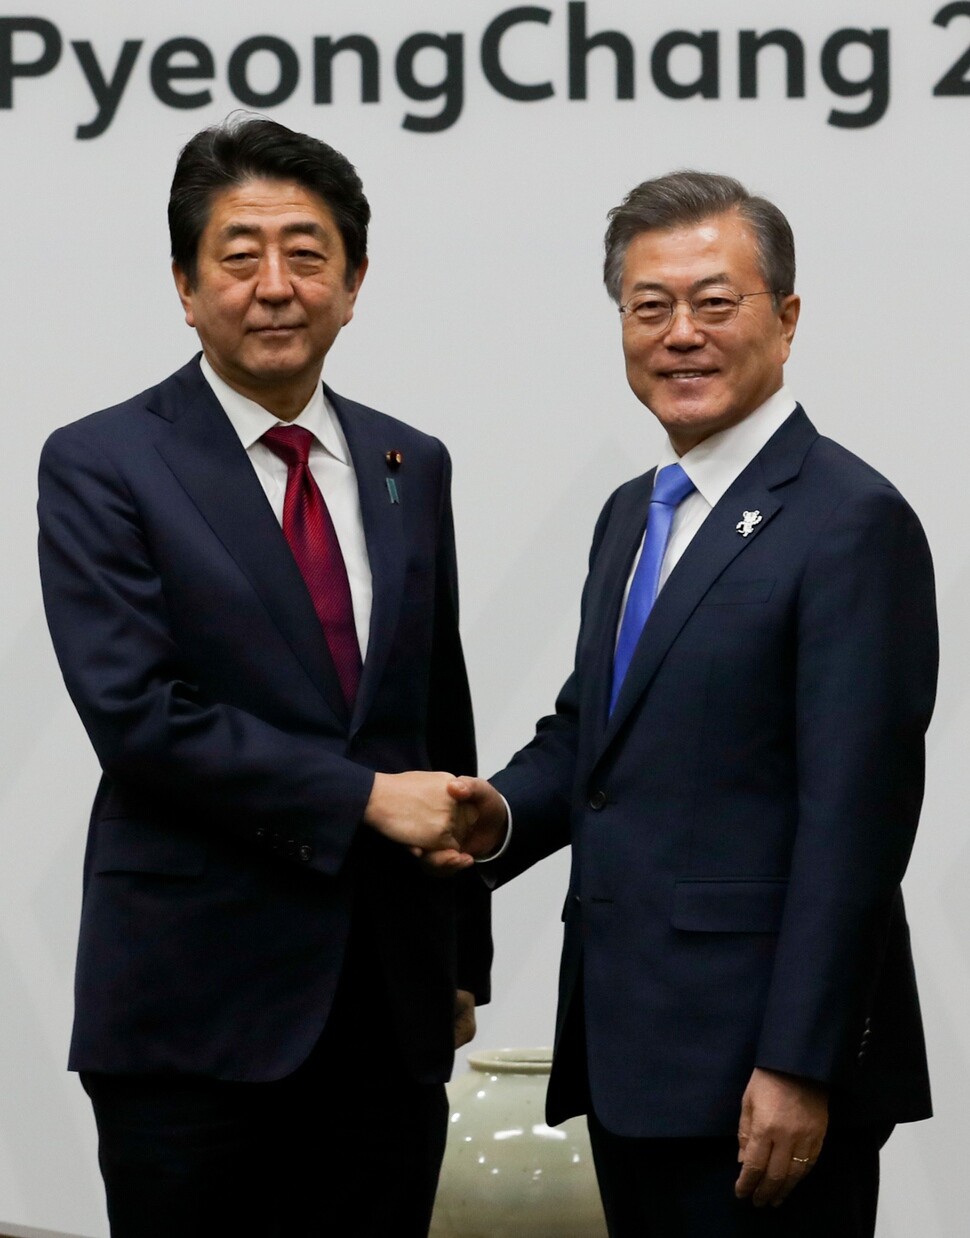 President Moon Jae-in shakes hands with Japanese Prime Minister Shinzo Abe prior to their summit at the Blisshill Stay at Yongpyong Resort in Pyeongchang County